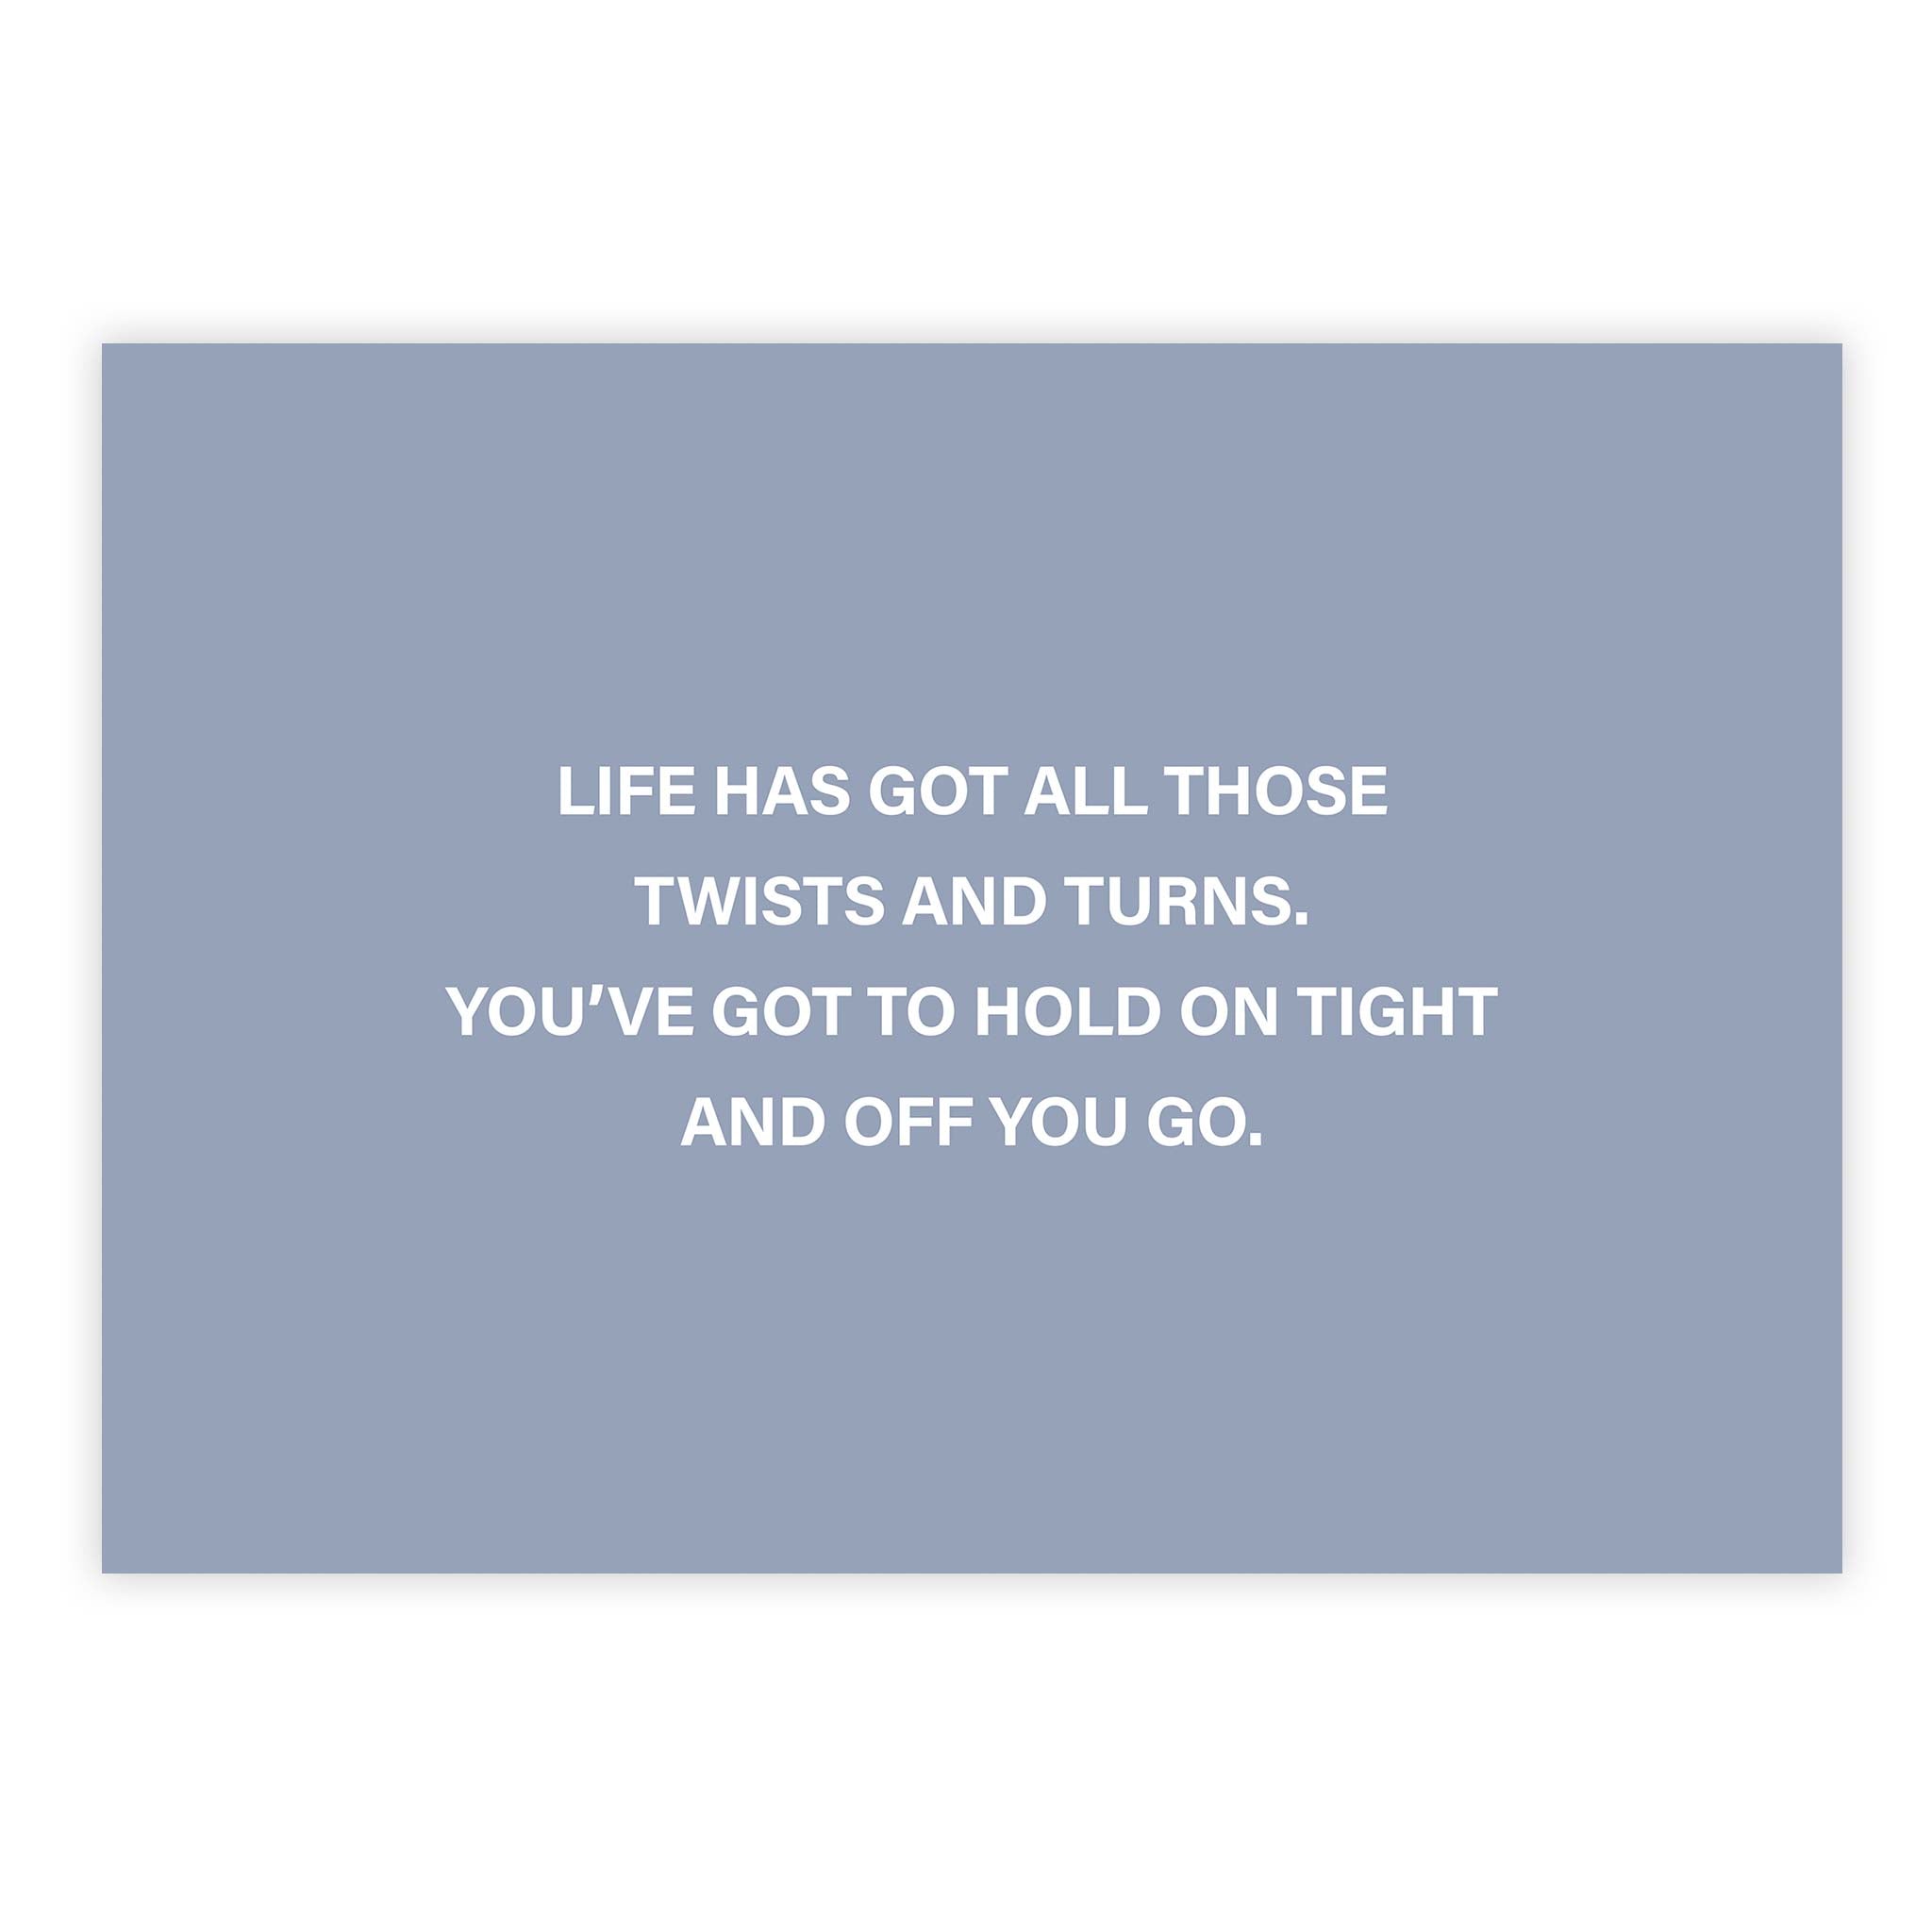 Life has got all those twists and turns. You’ve got to hold on tight and off you go